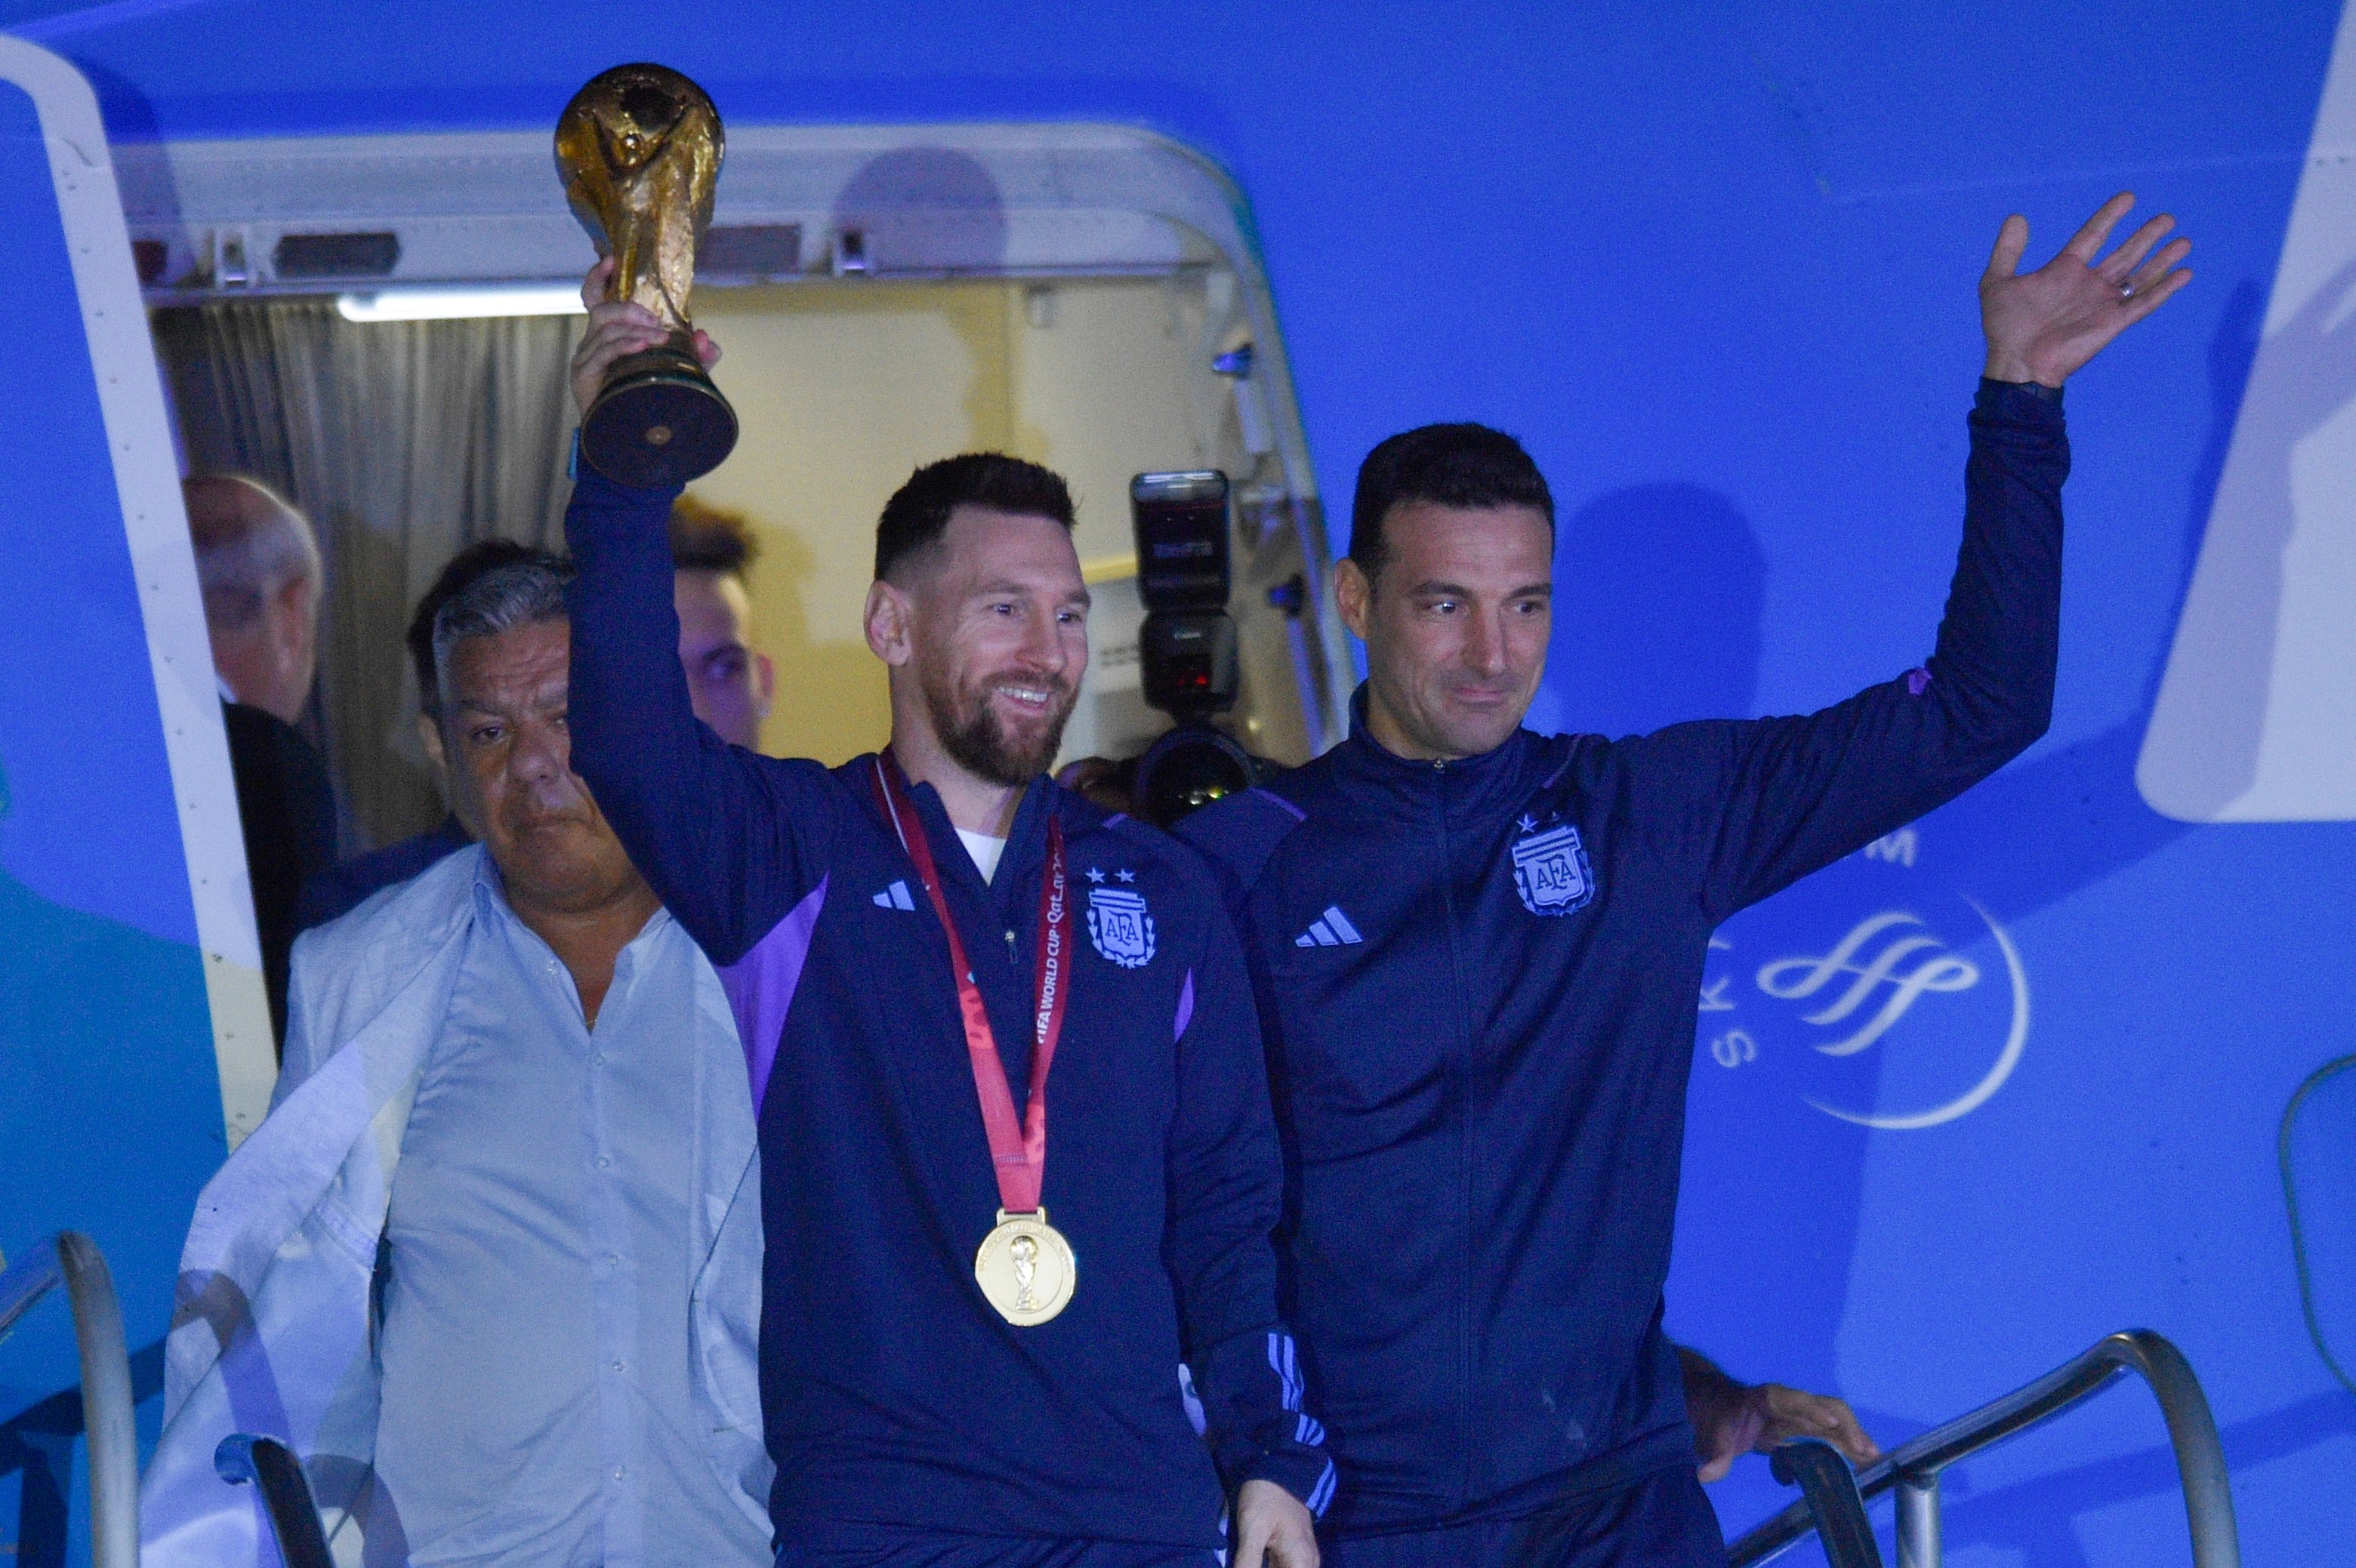 Messi Rosario Celebration: Little boy from Rosario returns HOME with GOD's stature, Thousands of fans welcome Lionel Messi at home following FIFA World Cup triumph -WATCH video